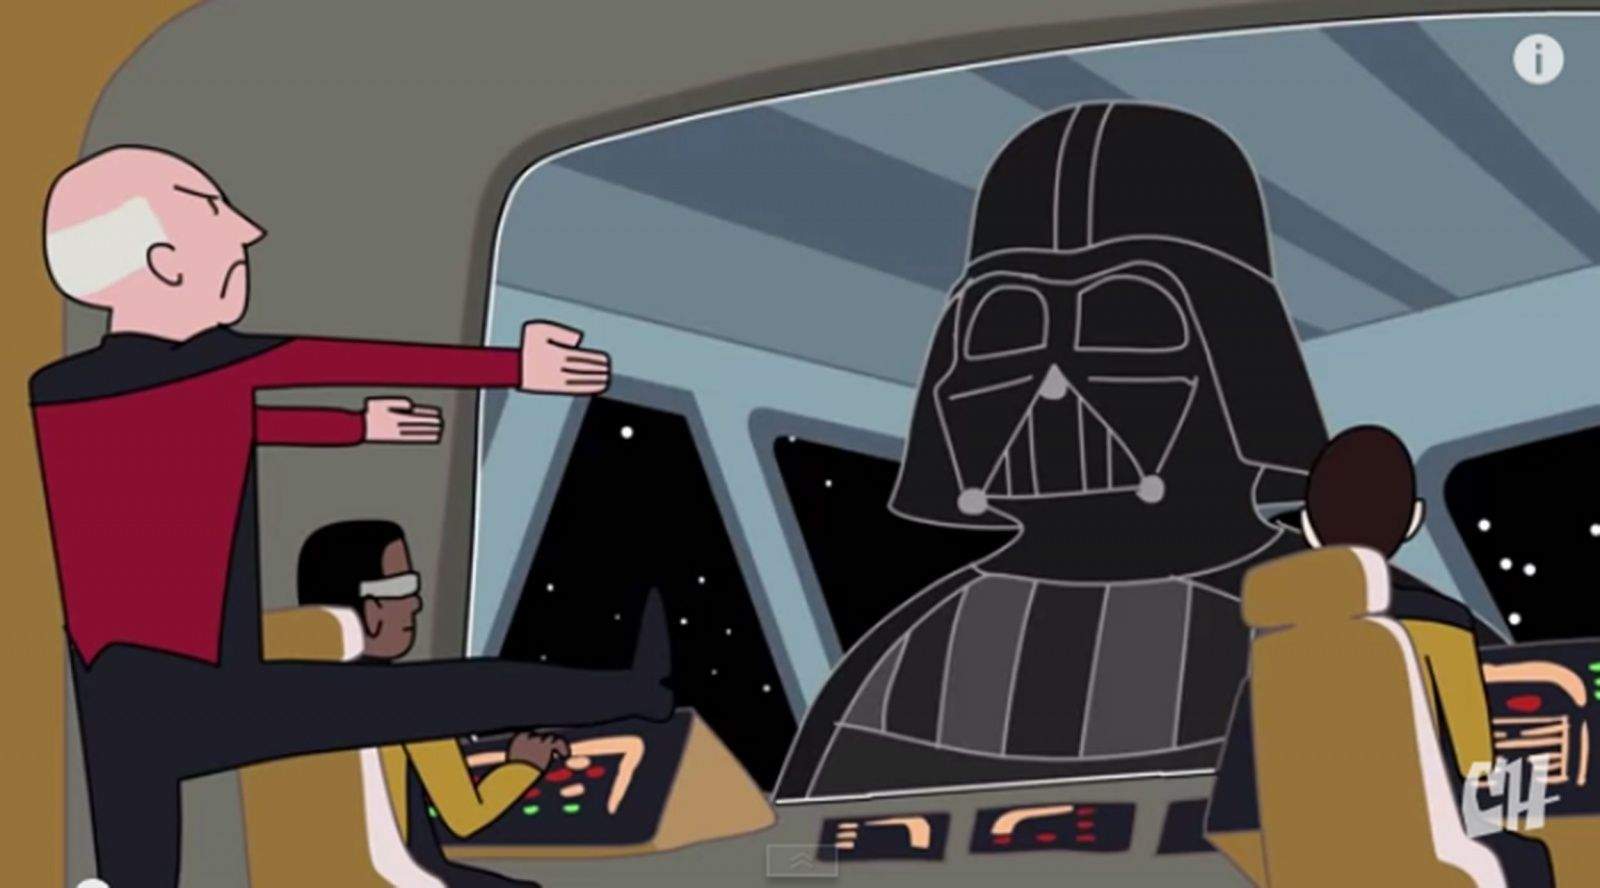 Darth Vader pushes all of Captain Picard's buttons in this sketch animation from College Humor.